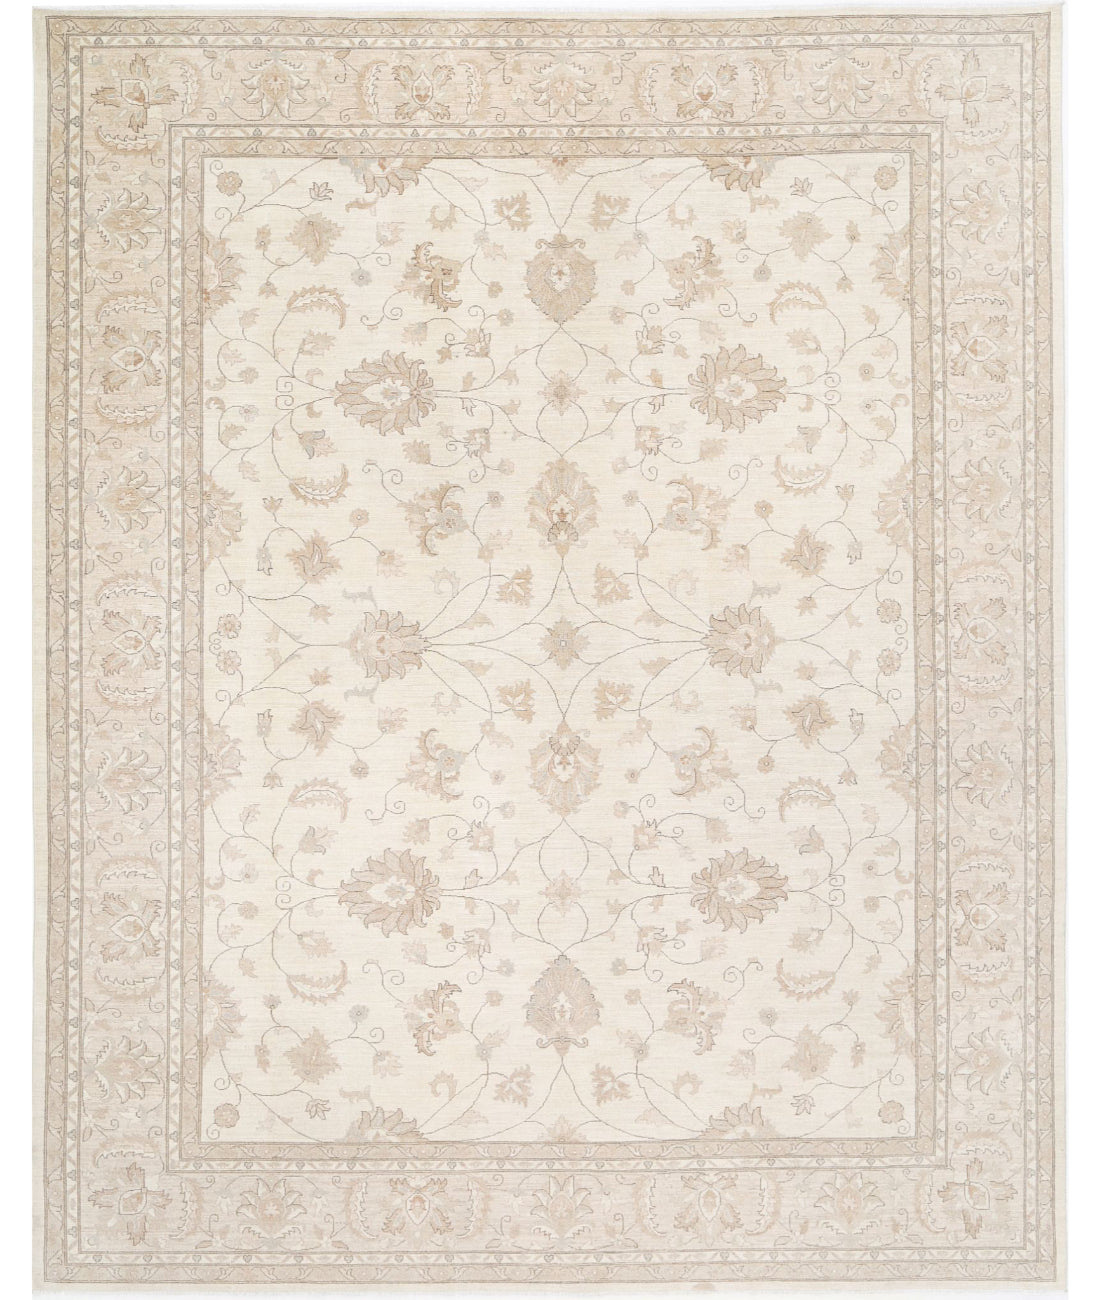 Hand Knotted Serenity Wool Rug - 11'8'' x 14'6'' 11'8'' x 14'6'' (350 X 435) / Ivory / Taupe